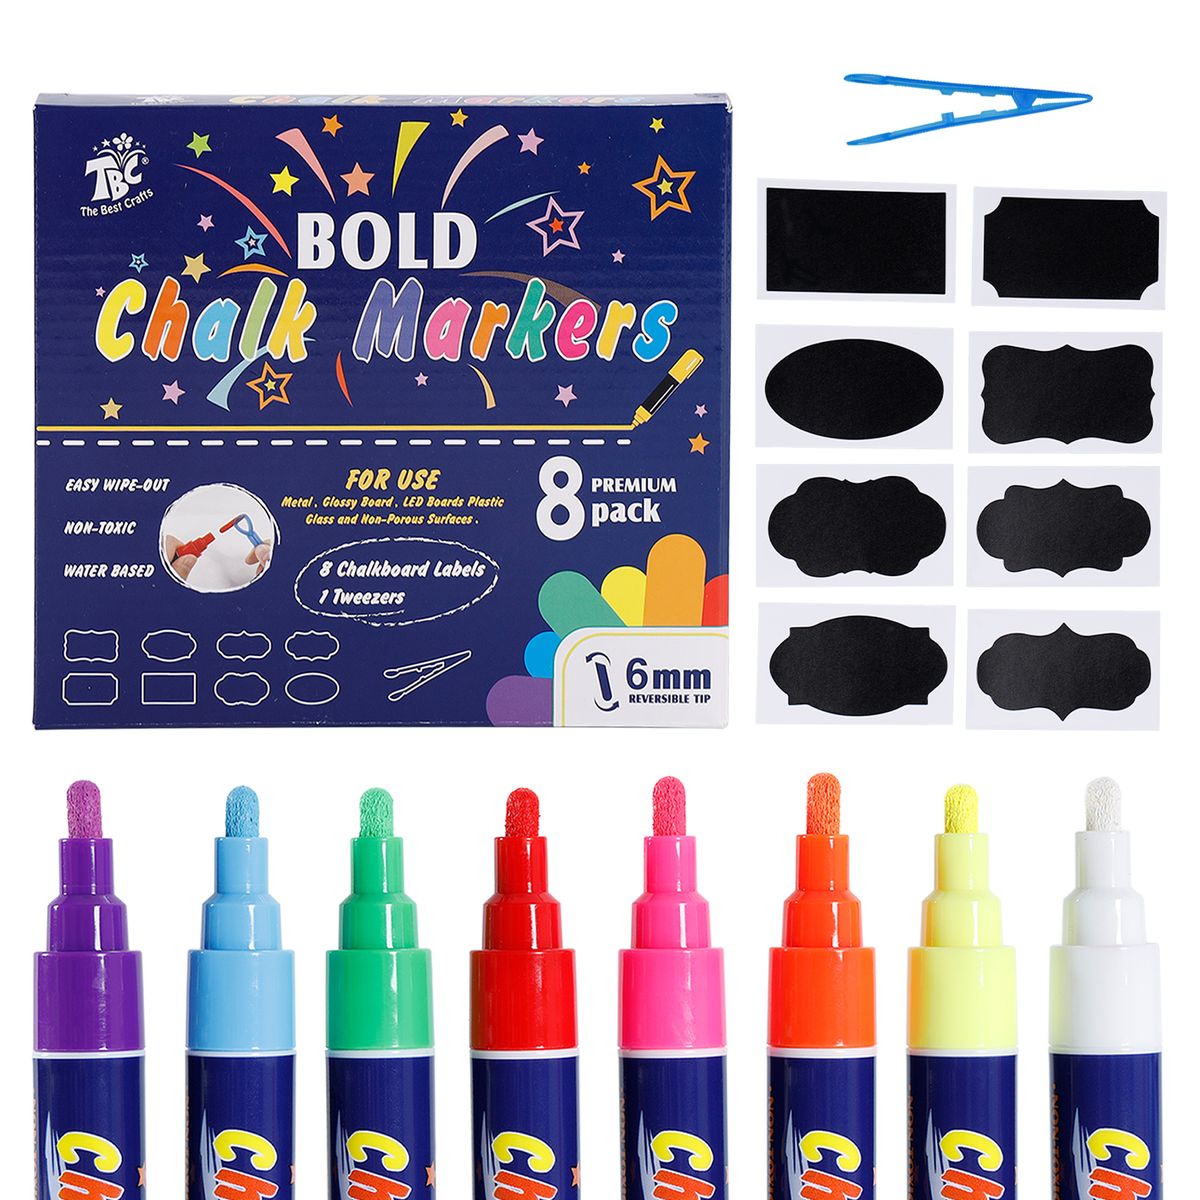 TBC The Best Craft- Bold Chalk Markers, Shop Today. Get it Tomorrow!